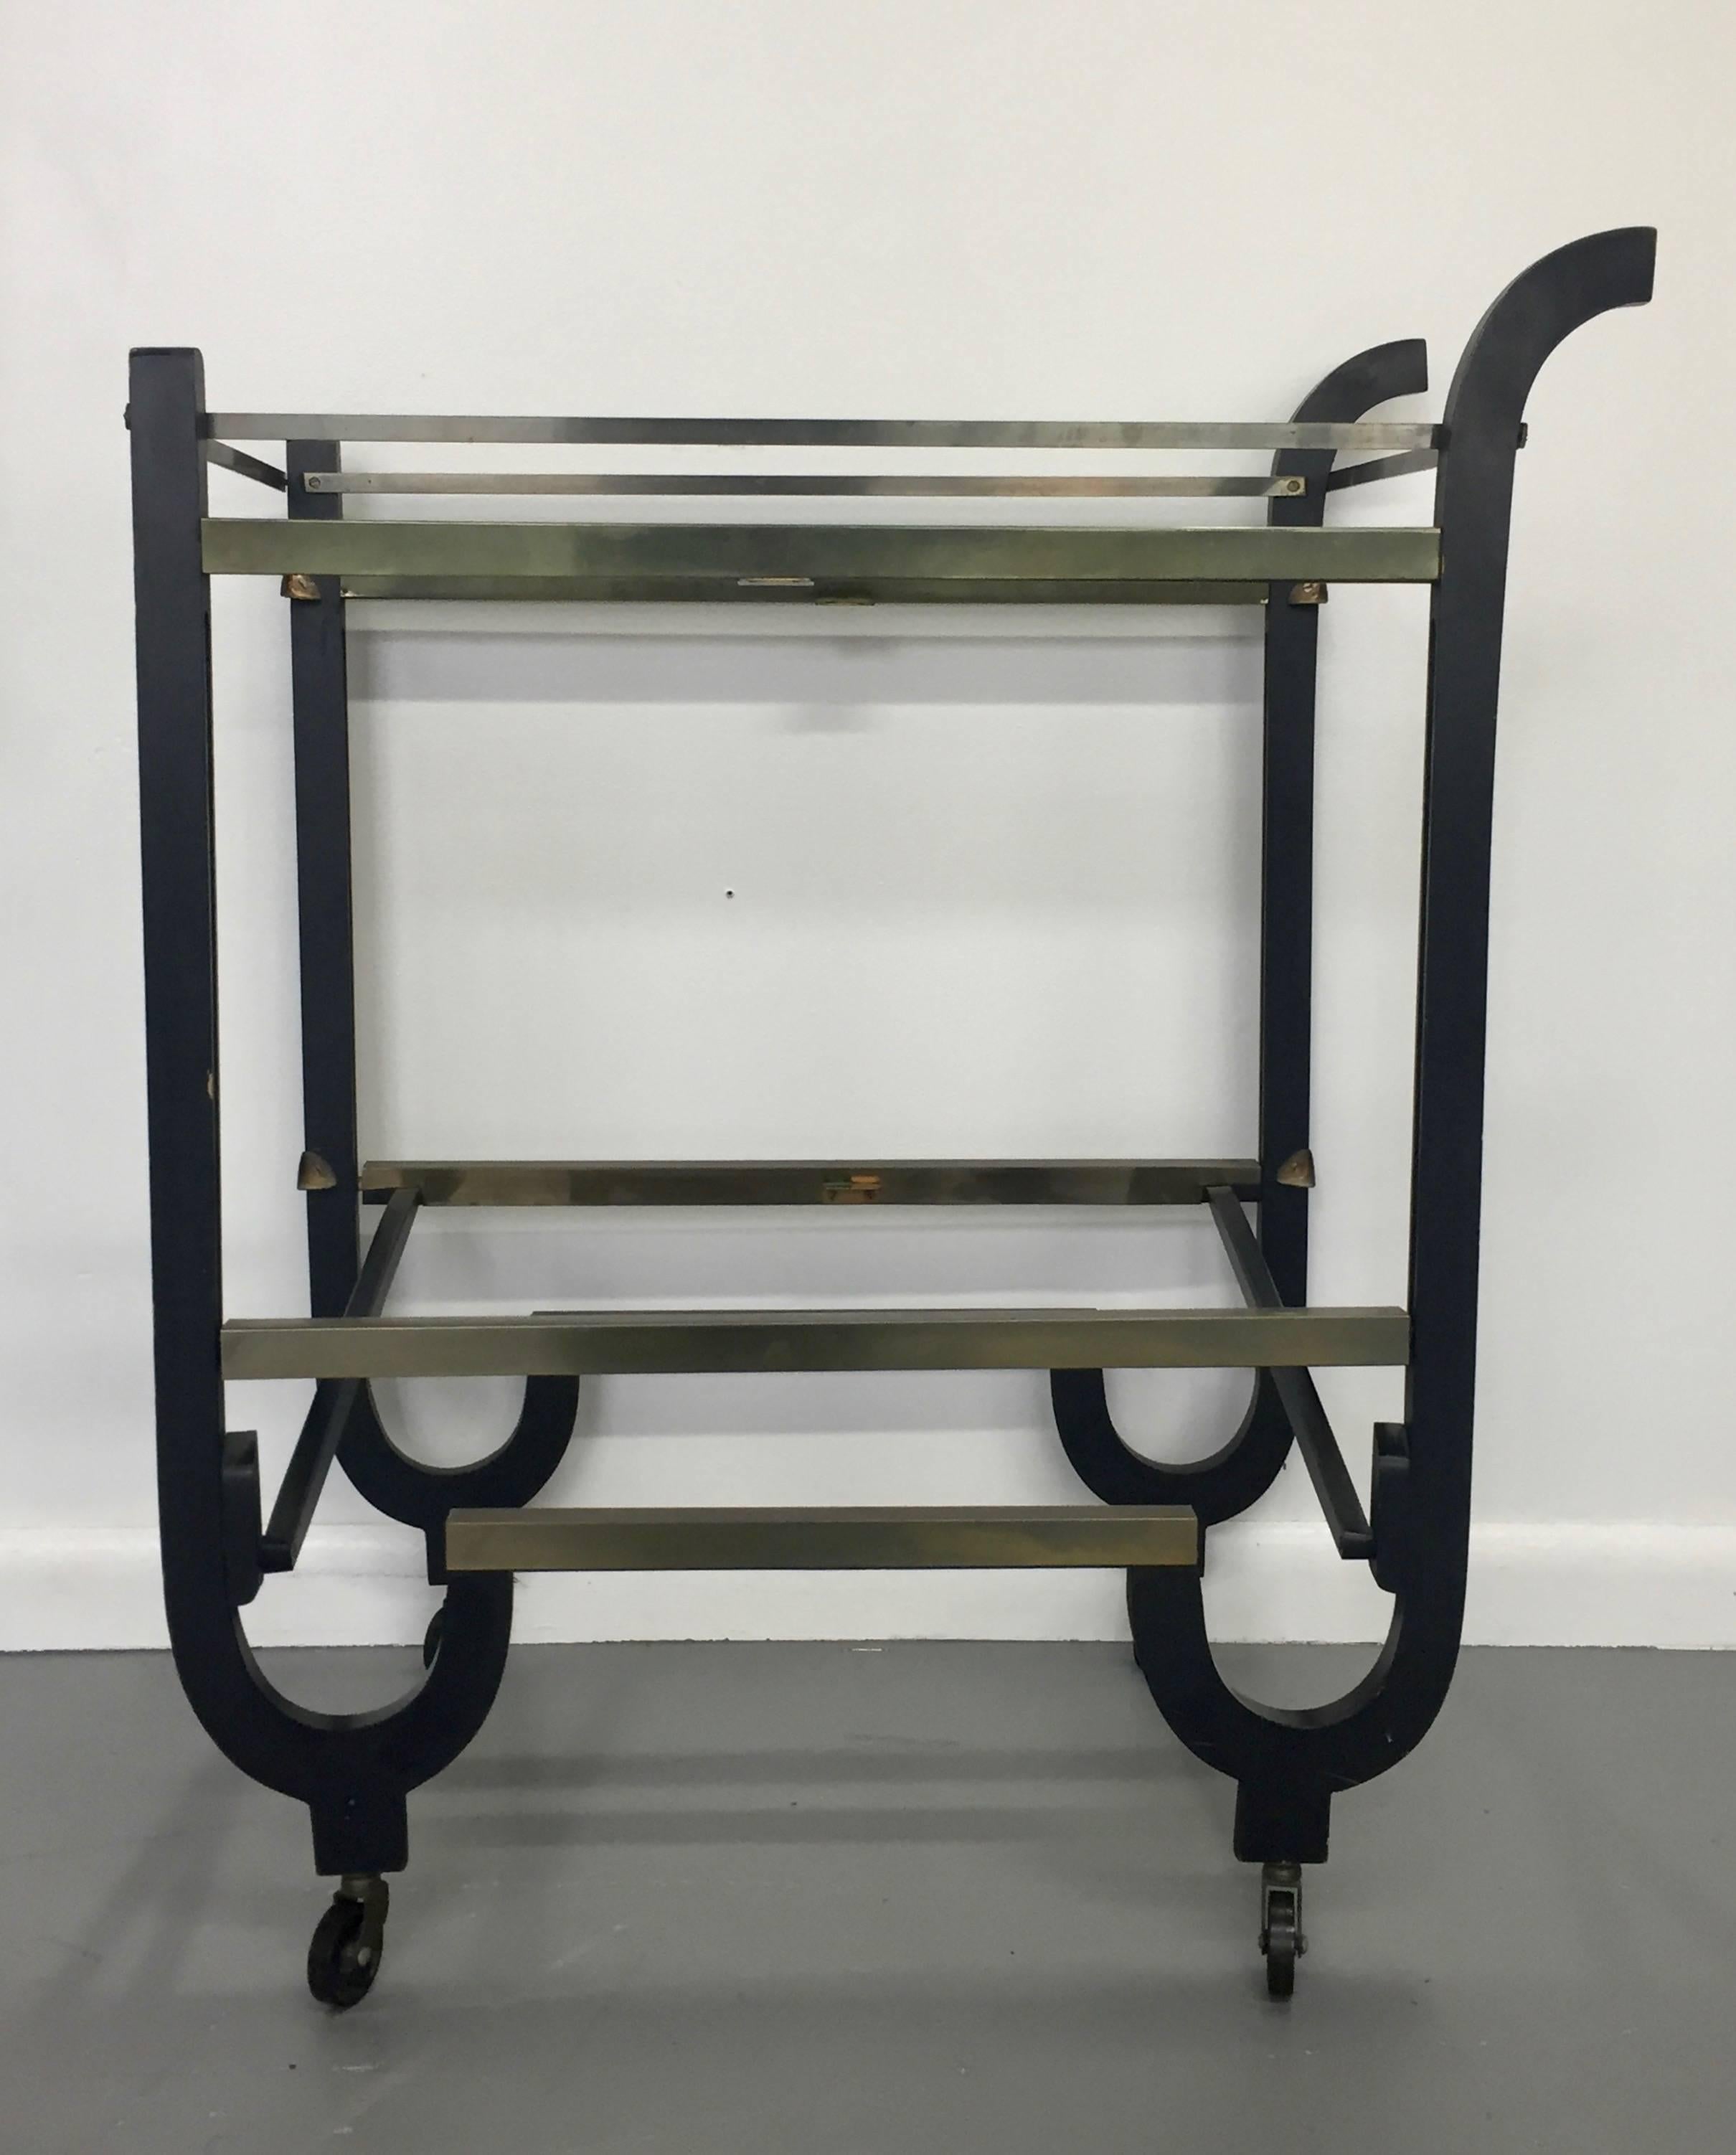 Clever Art Deco bar cart that ingeniously folds away. This bar cart has rails and an ebonized wooden frame and of course high Art Deco styling. Attributed to Deskey